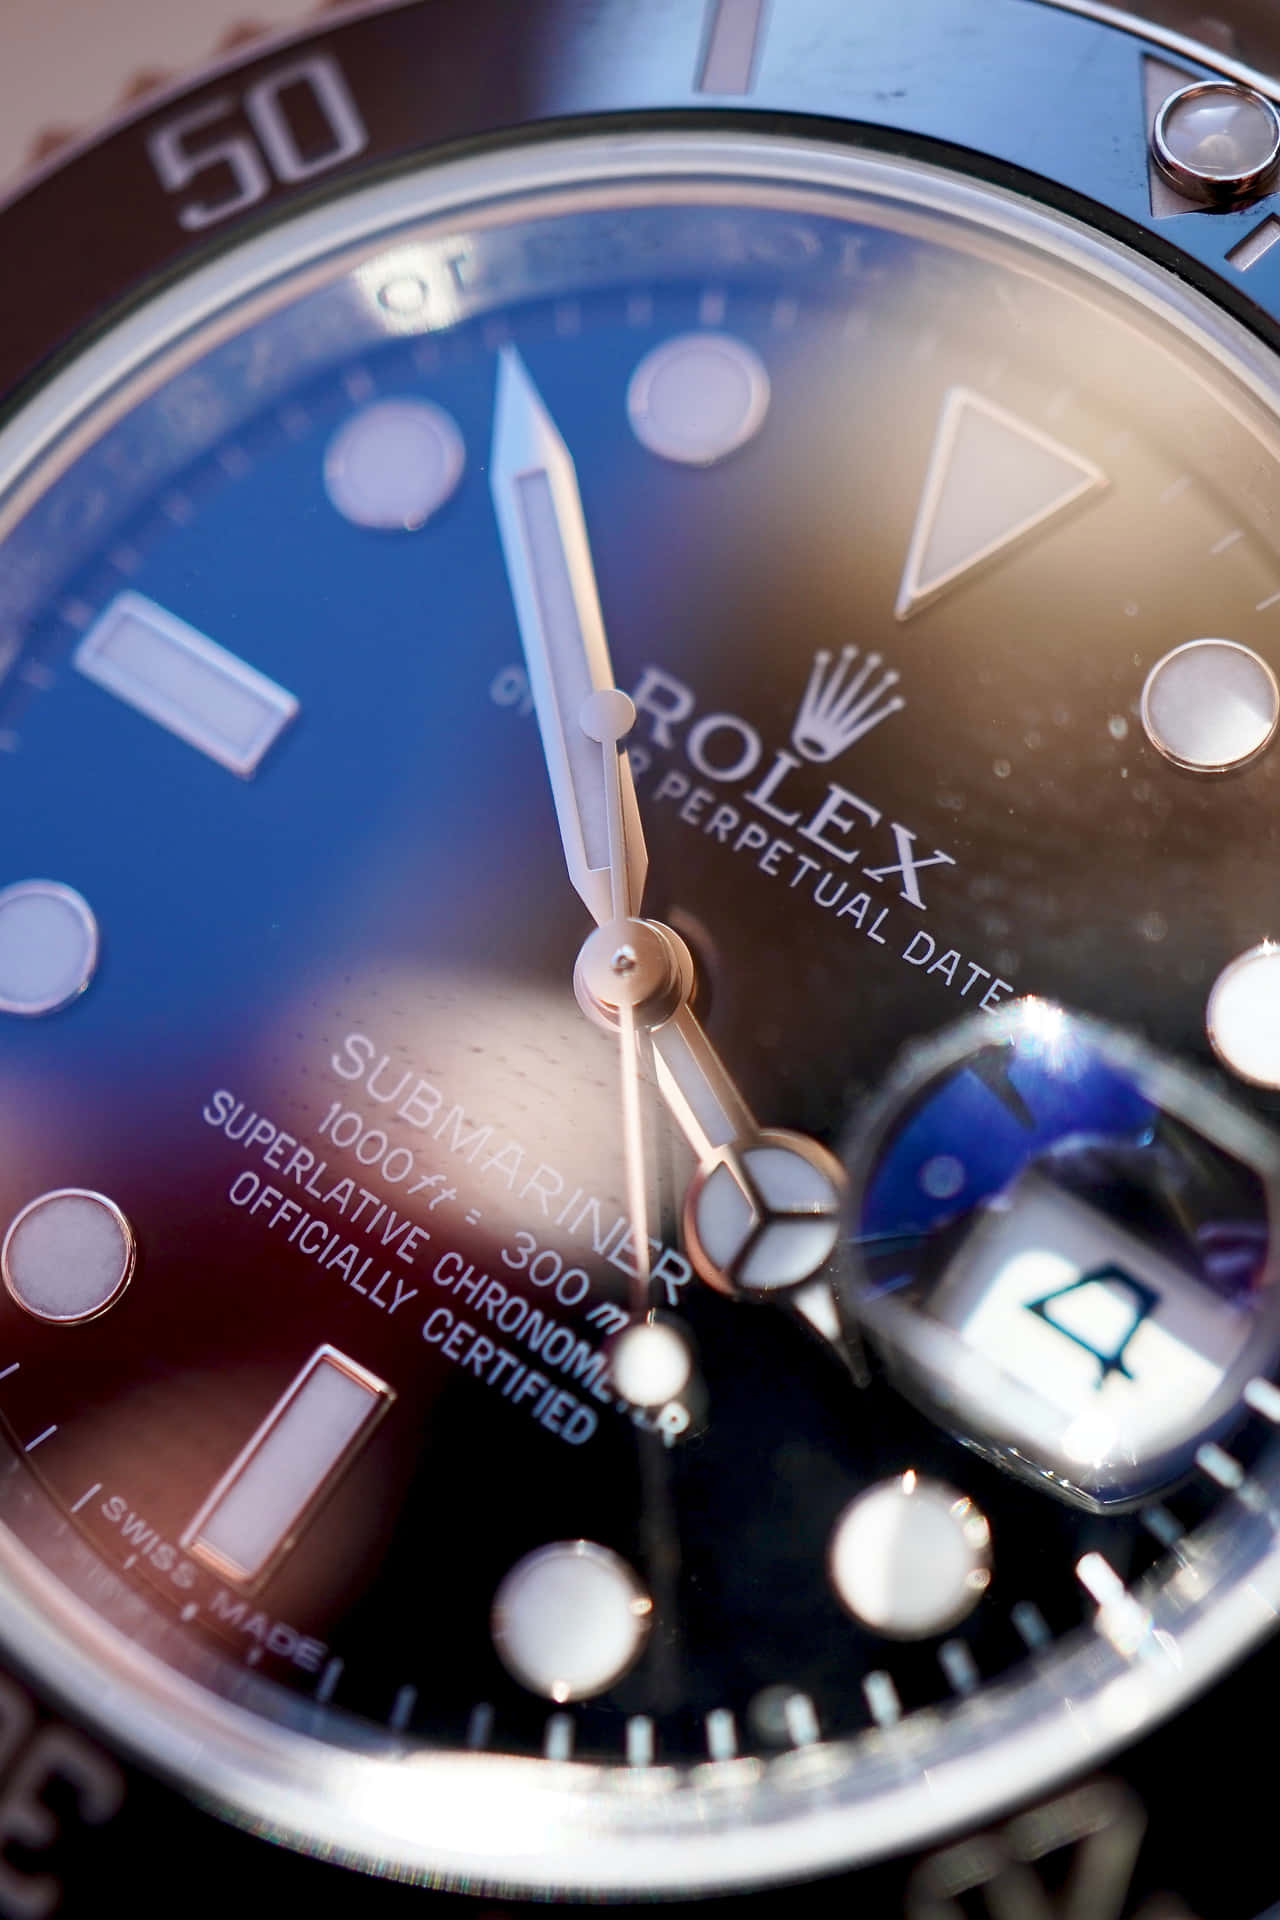 Caption: Classic Rolex Oyster Perpetual Watch Wallpaper